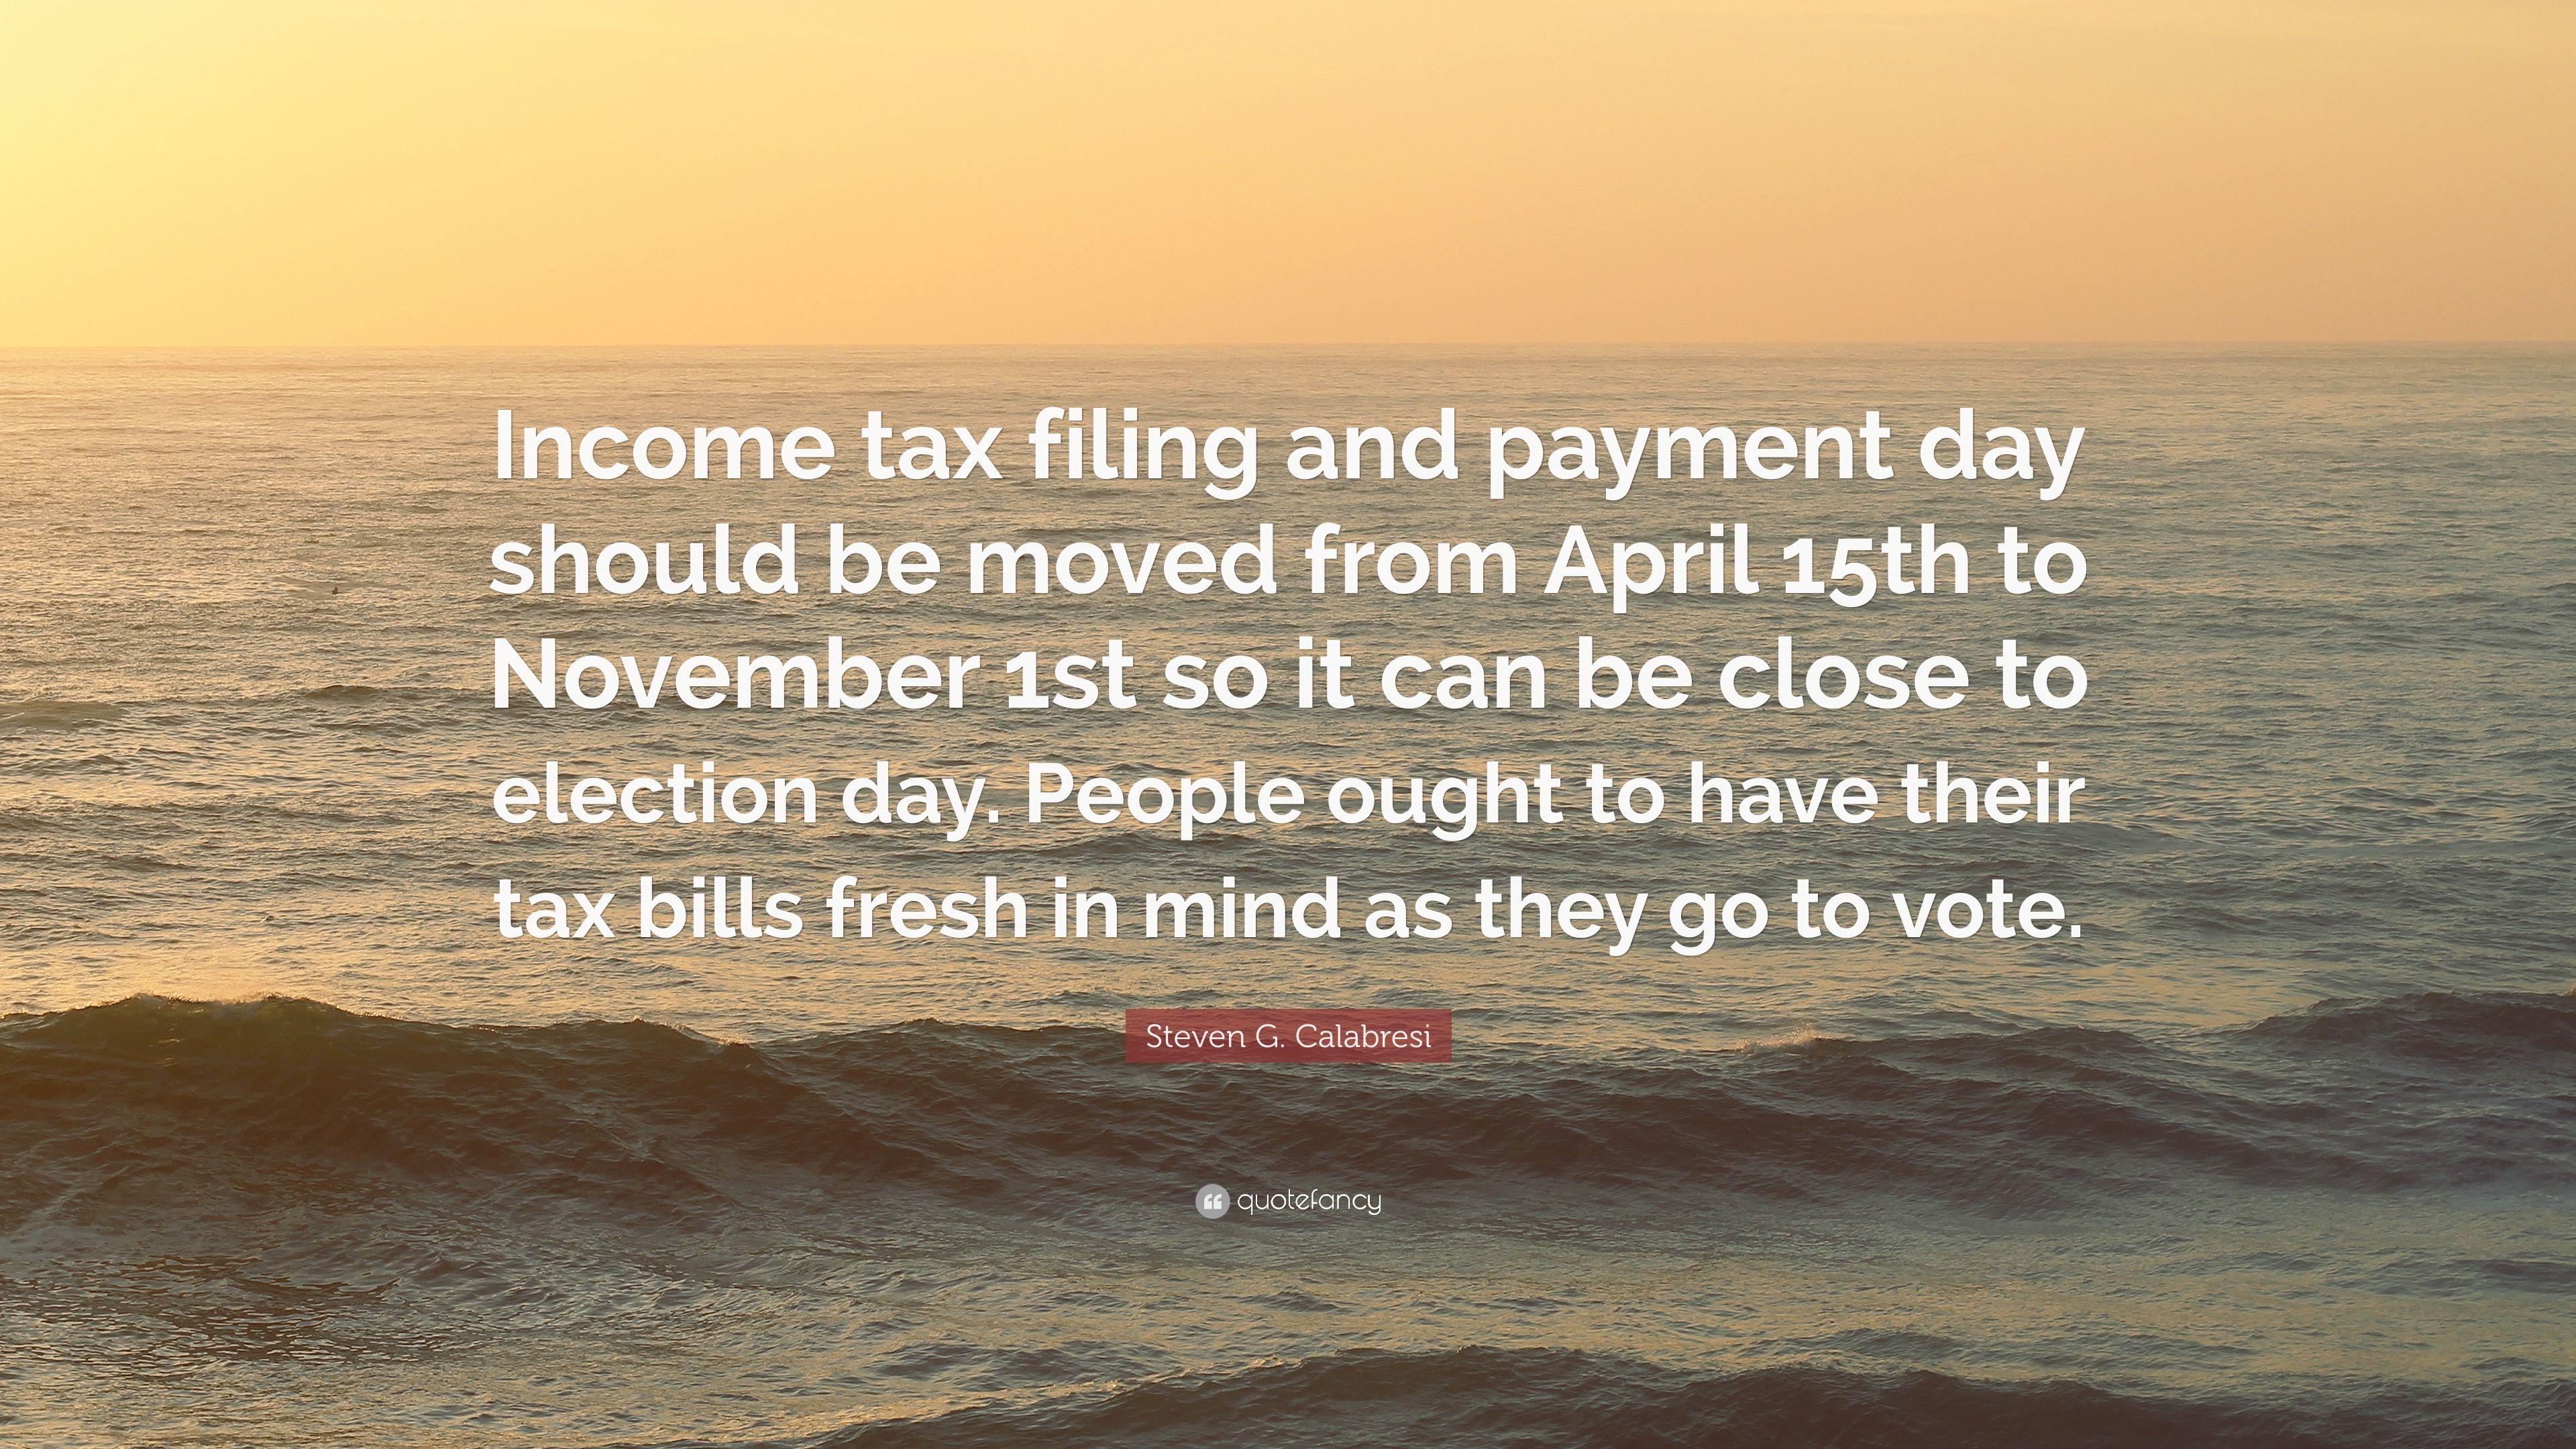 Steven G. Calabresi Quote: “Income tax filing and payment day